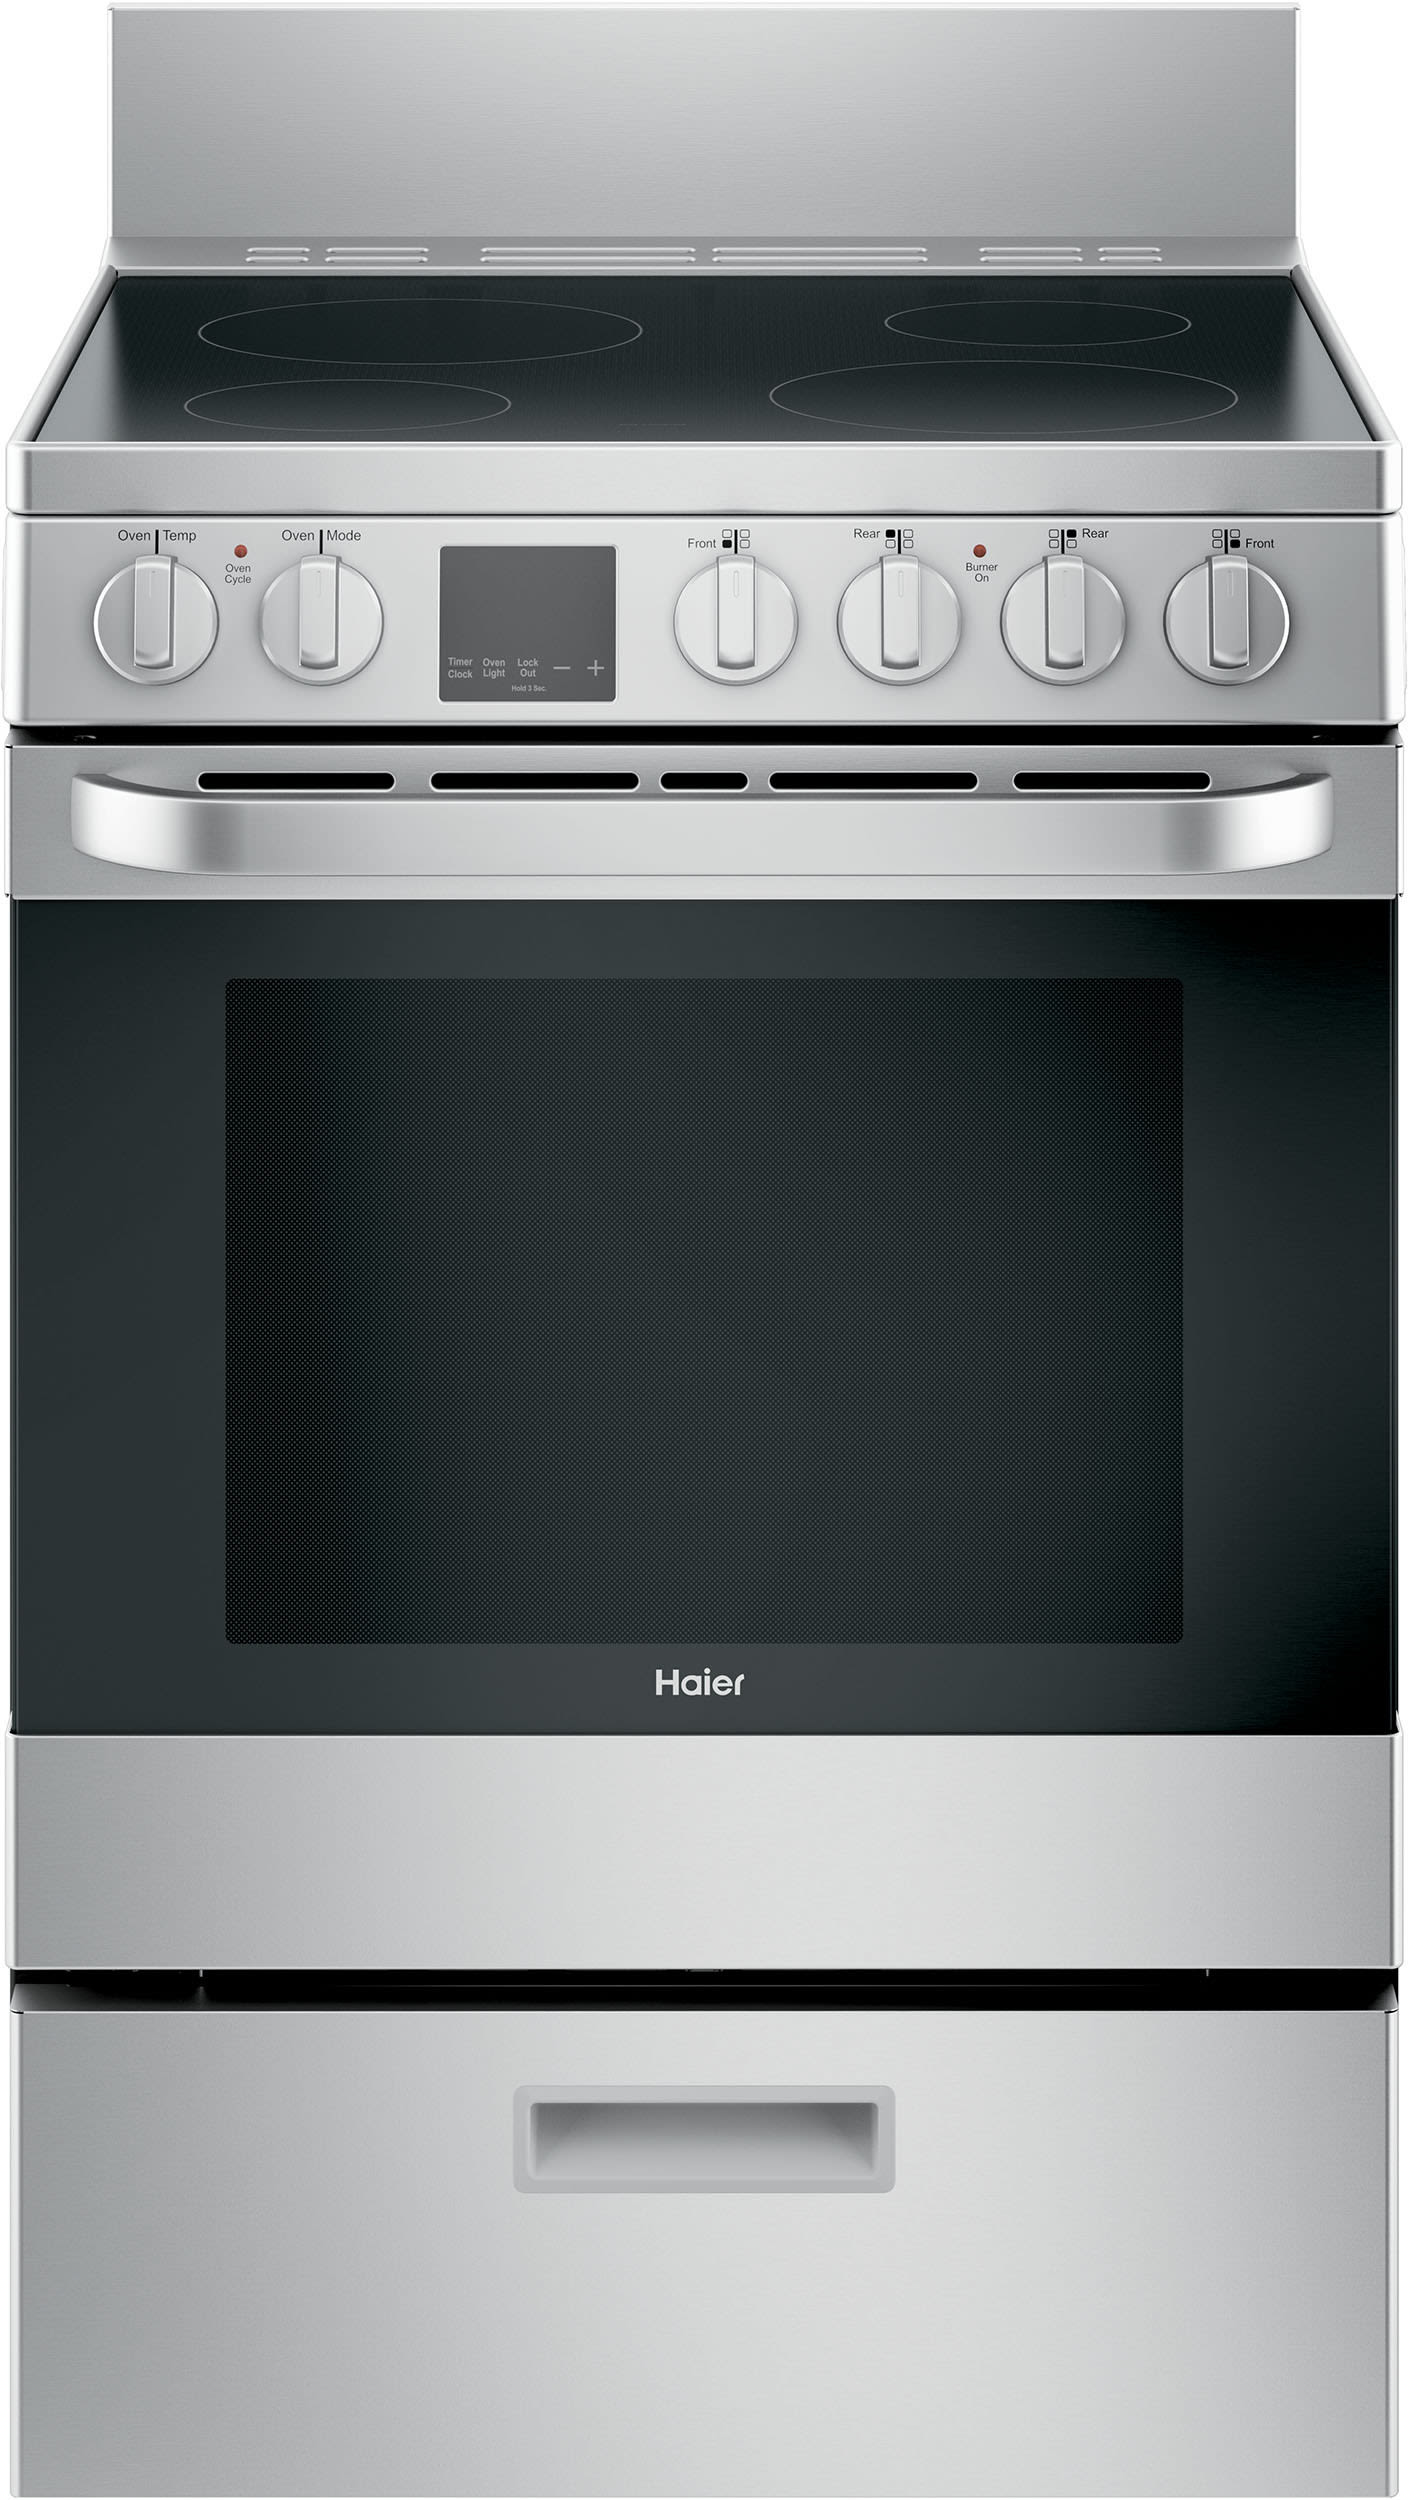 Haier QAS740RMSS 24 Inch Freestanding Electric Range with Convection